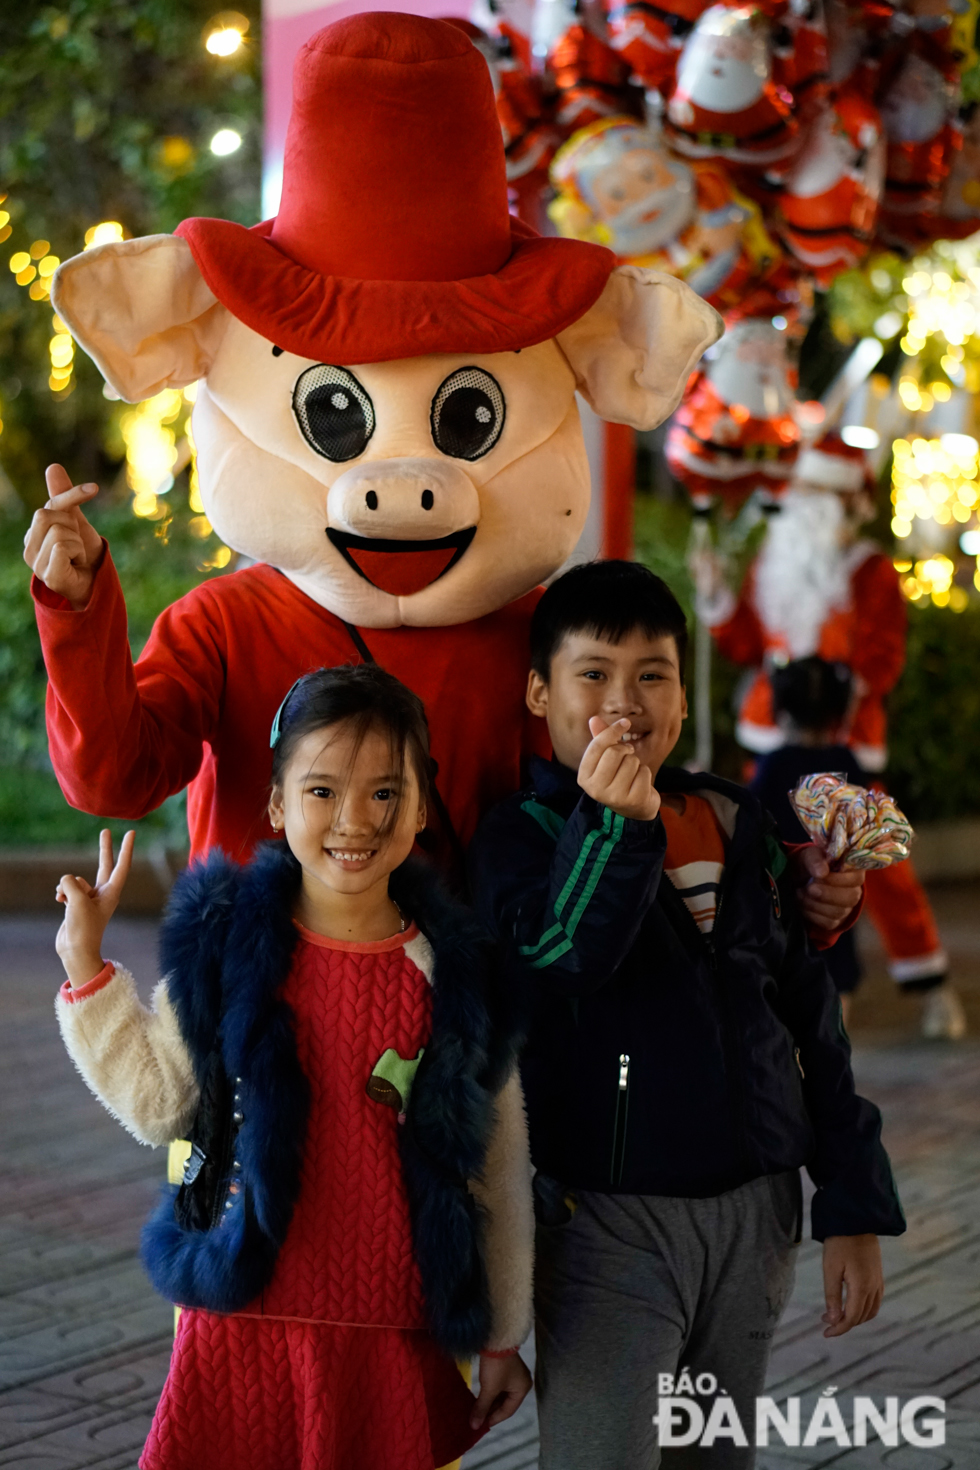 Christmas season is an opportunity for children to go out and have lots of fun with their family